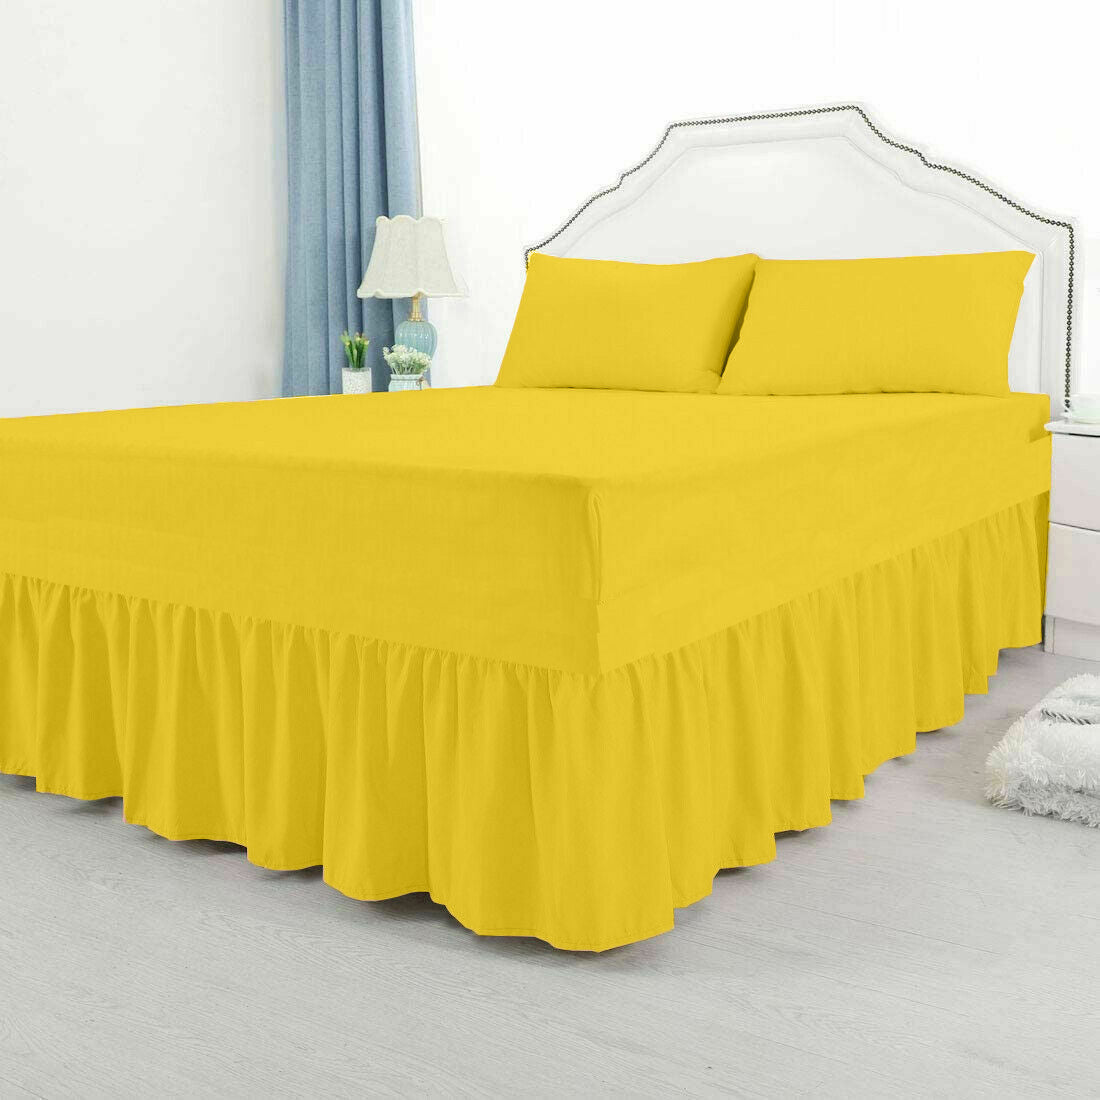 Extra Deep Fire Retardant Fitted Valance Sheet Single Double Size Polycotton Bed Sheets ⭐⭐⭐⭐